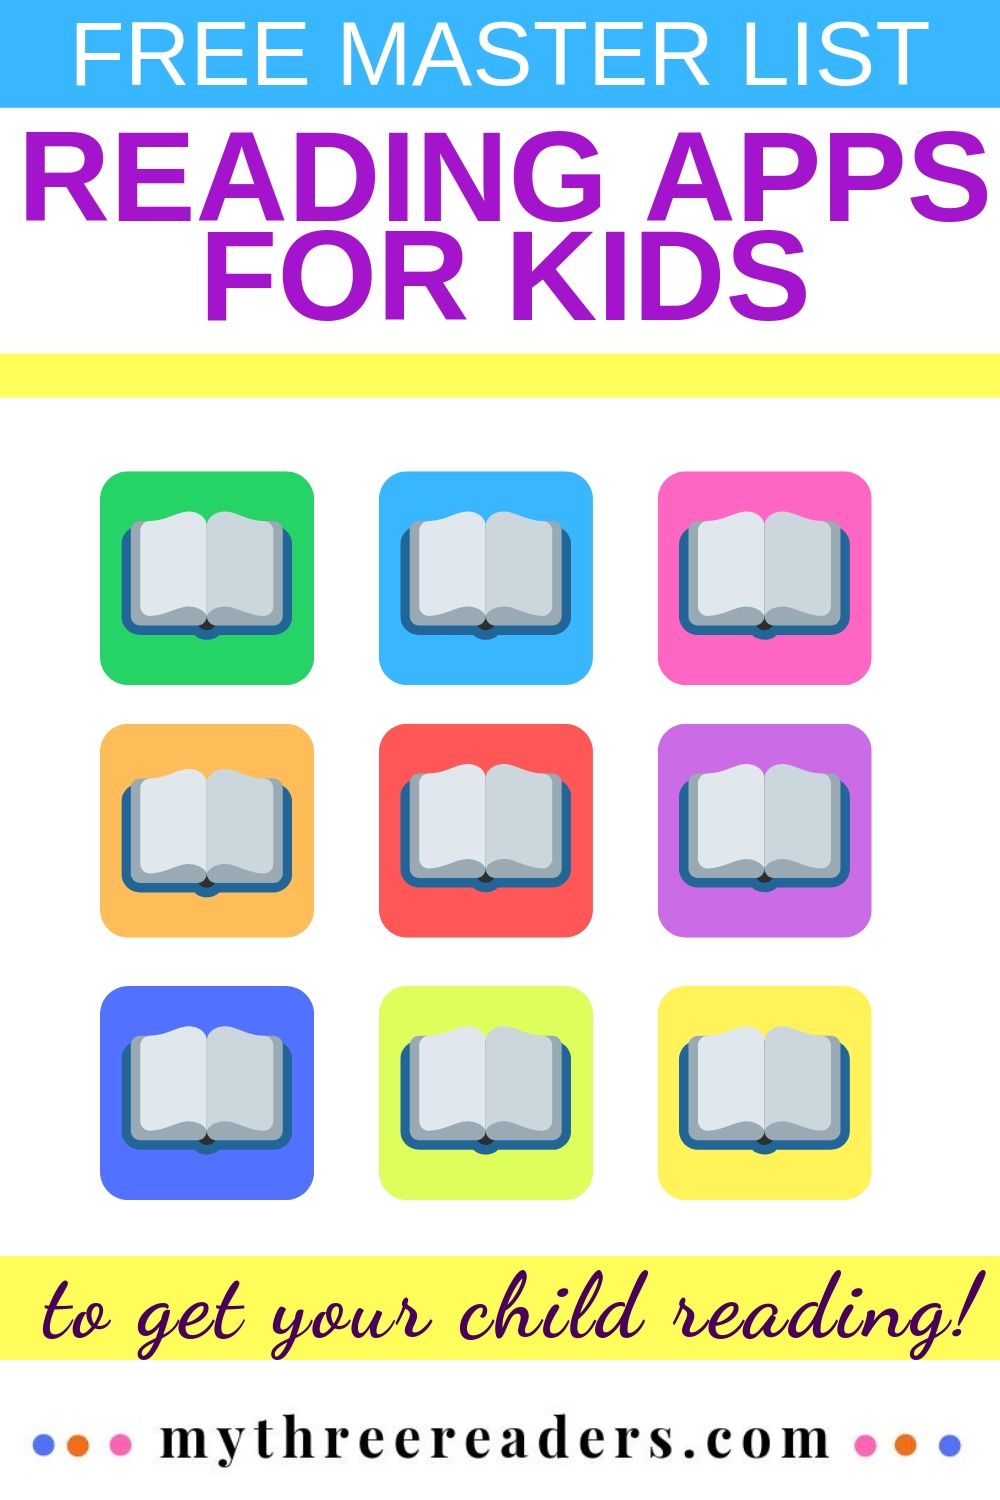 Best reading apps for 1st graders, preschoolers and all beginning readers! Best app for learning letters and phonics sounds, plus free reading apps for elementary students with ebooks.